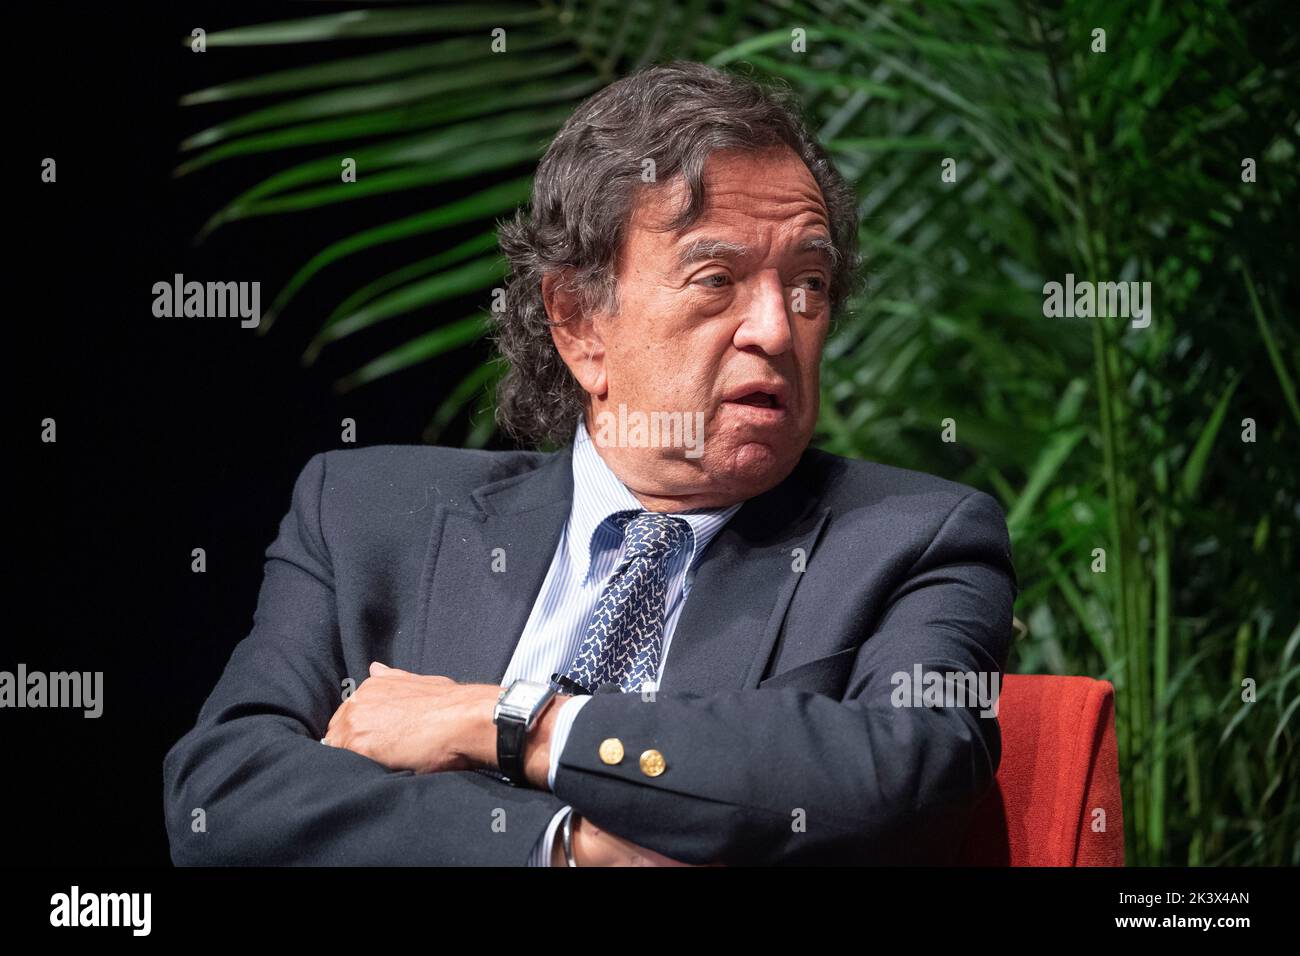 Austin Texas USA, September 24 2022: Former New Mexico governor and noted negotiator BILL RICHARDSON speaks during an interview session at the annual Texas Tribune Festival in downtown Austin. ©Bob Daemmrich Stock Photo